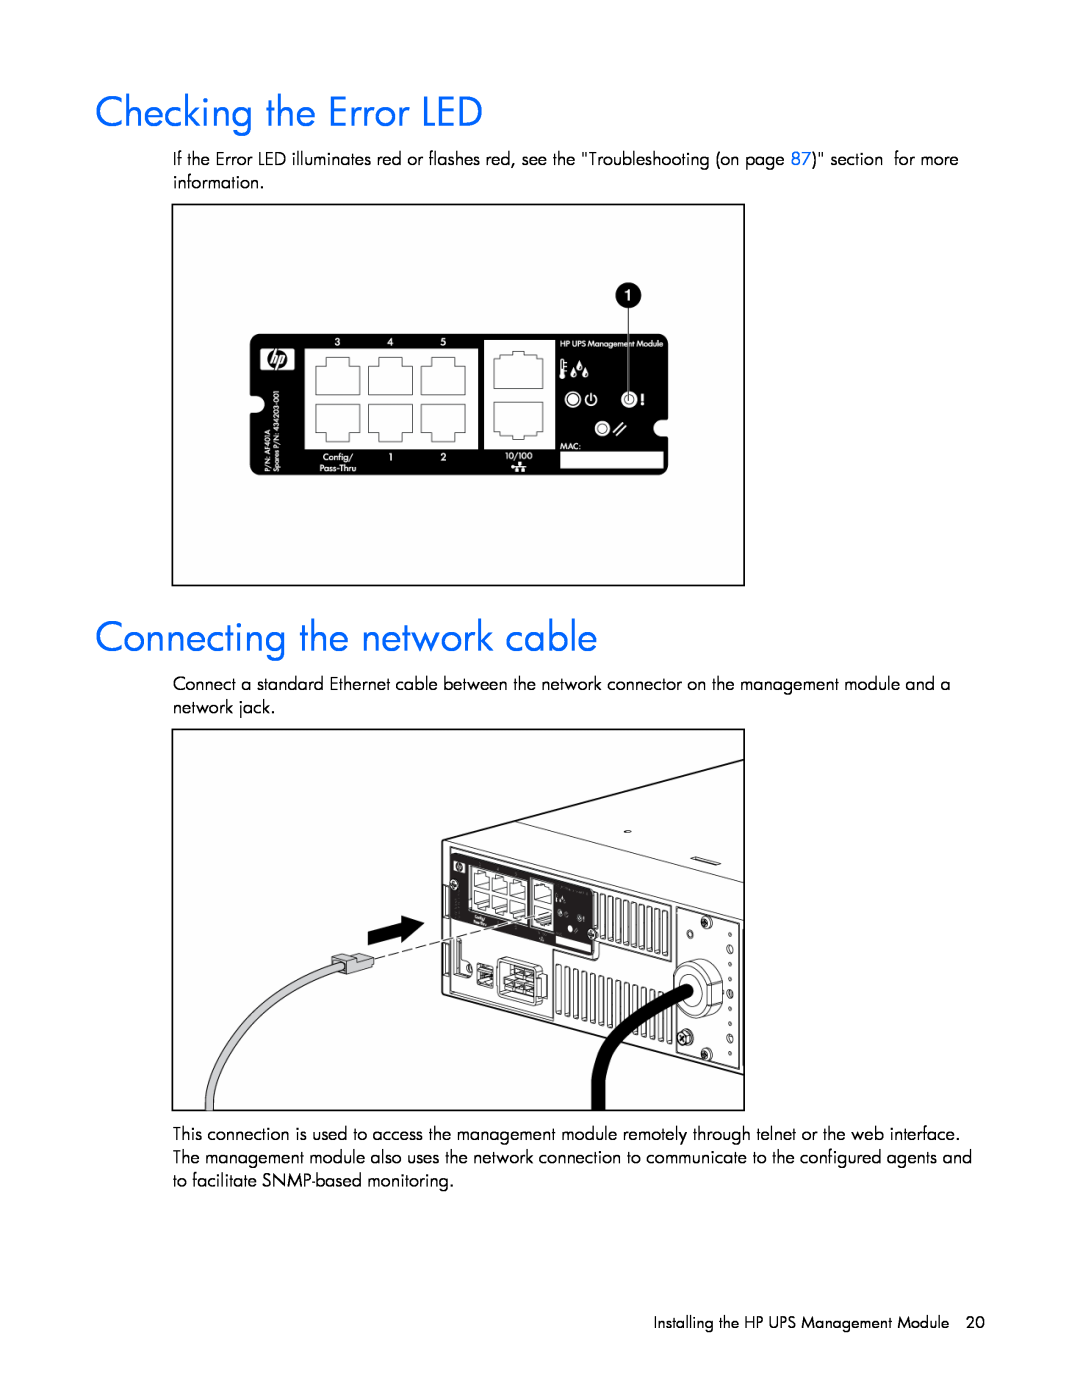 HP J4367A, A6584A, A1354A, A1353A, A1356A, J4373A, J4370A manual Checking the Error LED, Connecting the network cable 